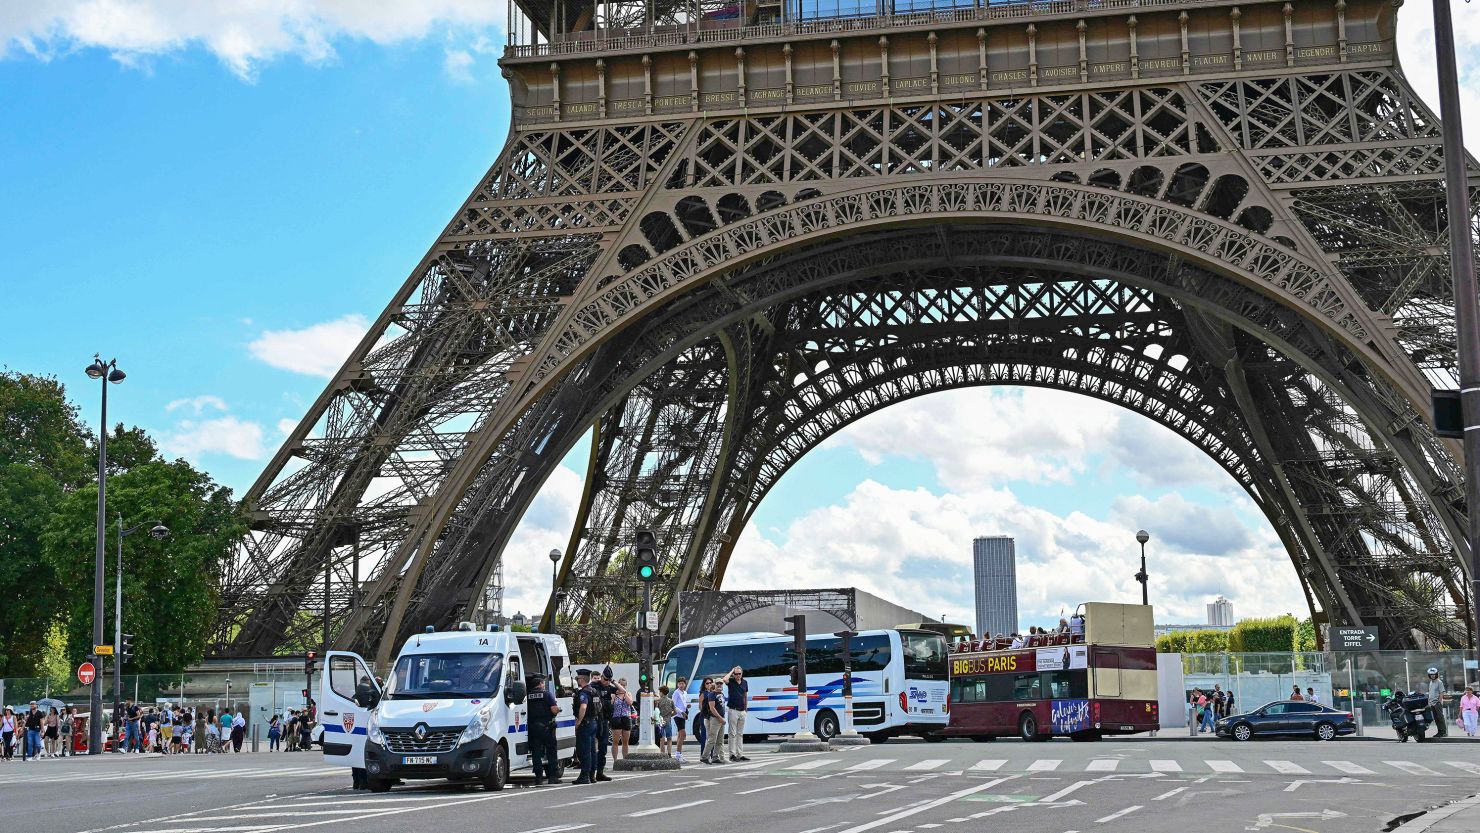 Police offices at the Eiffel Tower following the security alert.